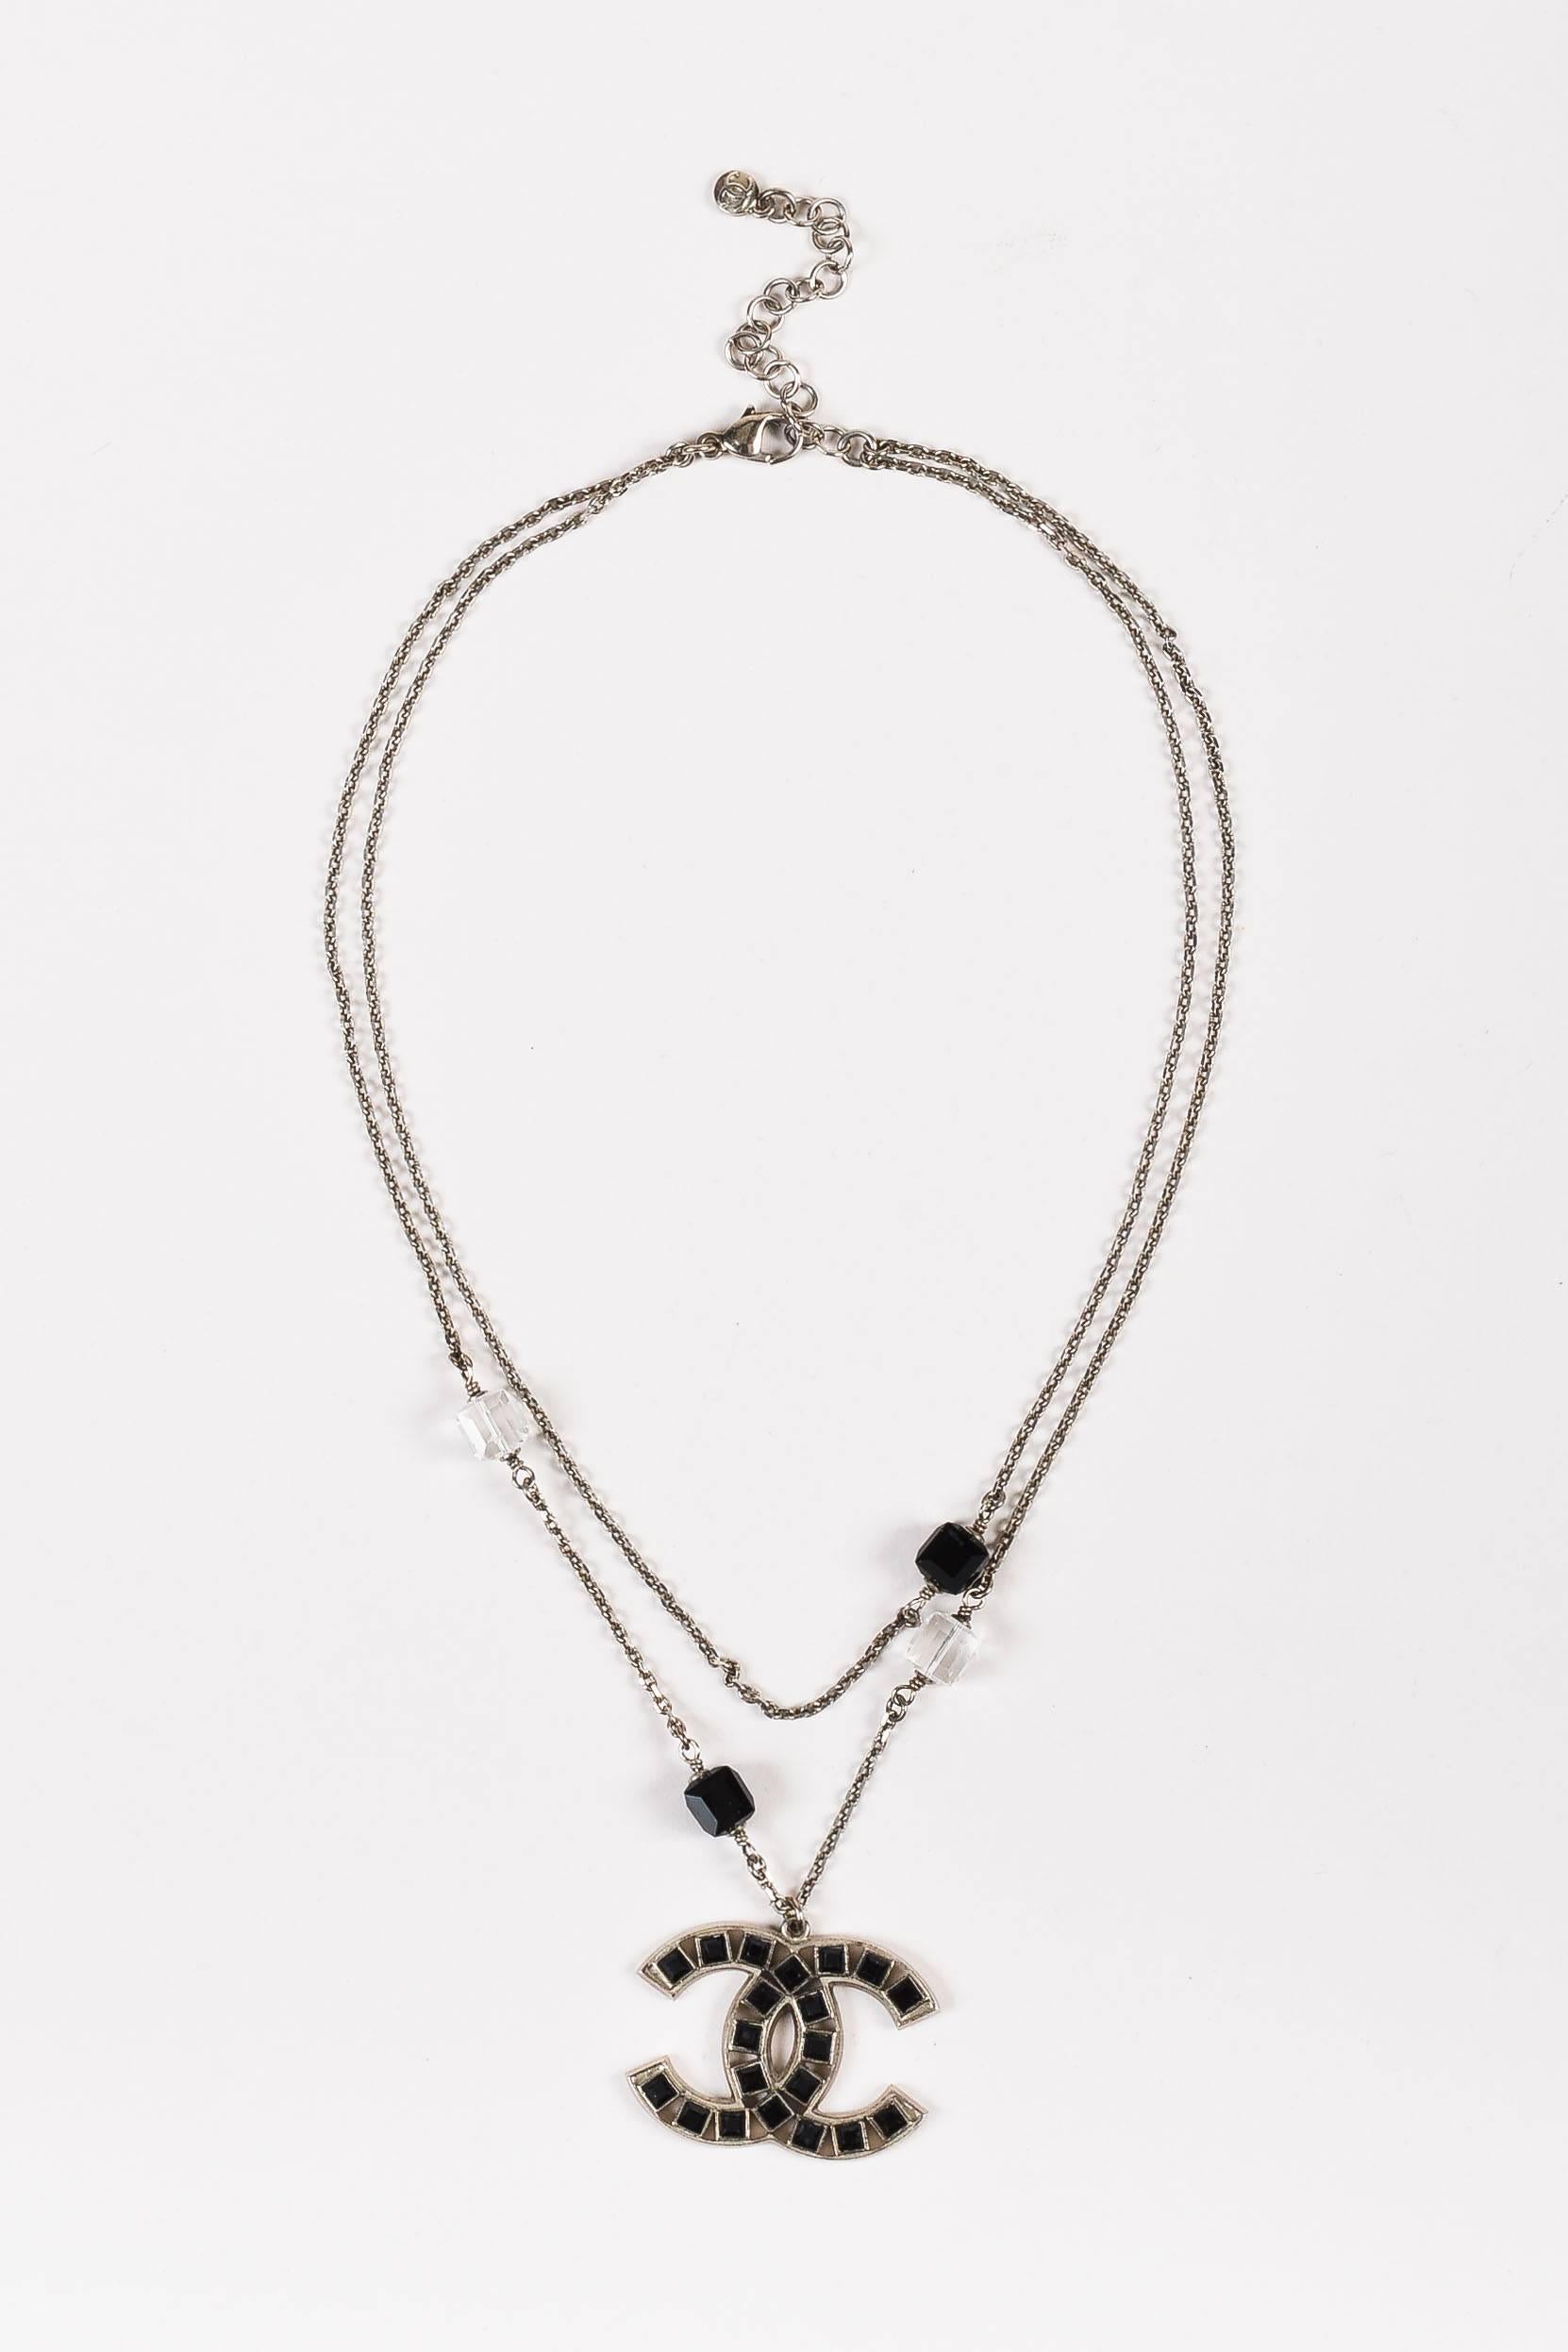 From the 2008 Spring Collection. This versatile Chanel necklace transitions effortlessly from day to night. Silver-tone metal. Two layered cable chains. Sparkling black & colorless Swarovski crystals. Iconic 'CC' logo pendant. Extender for